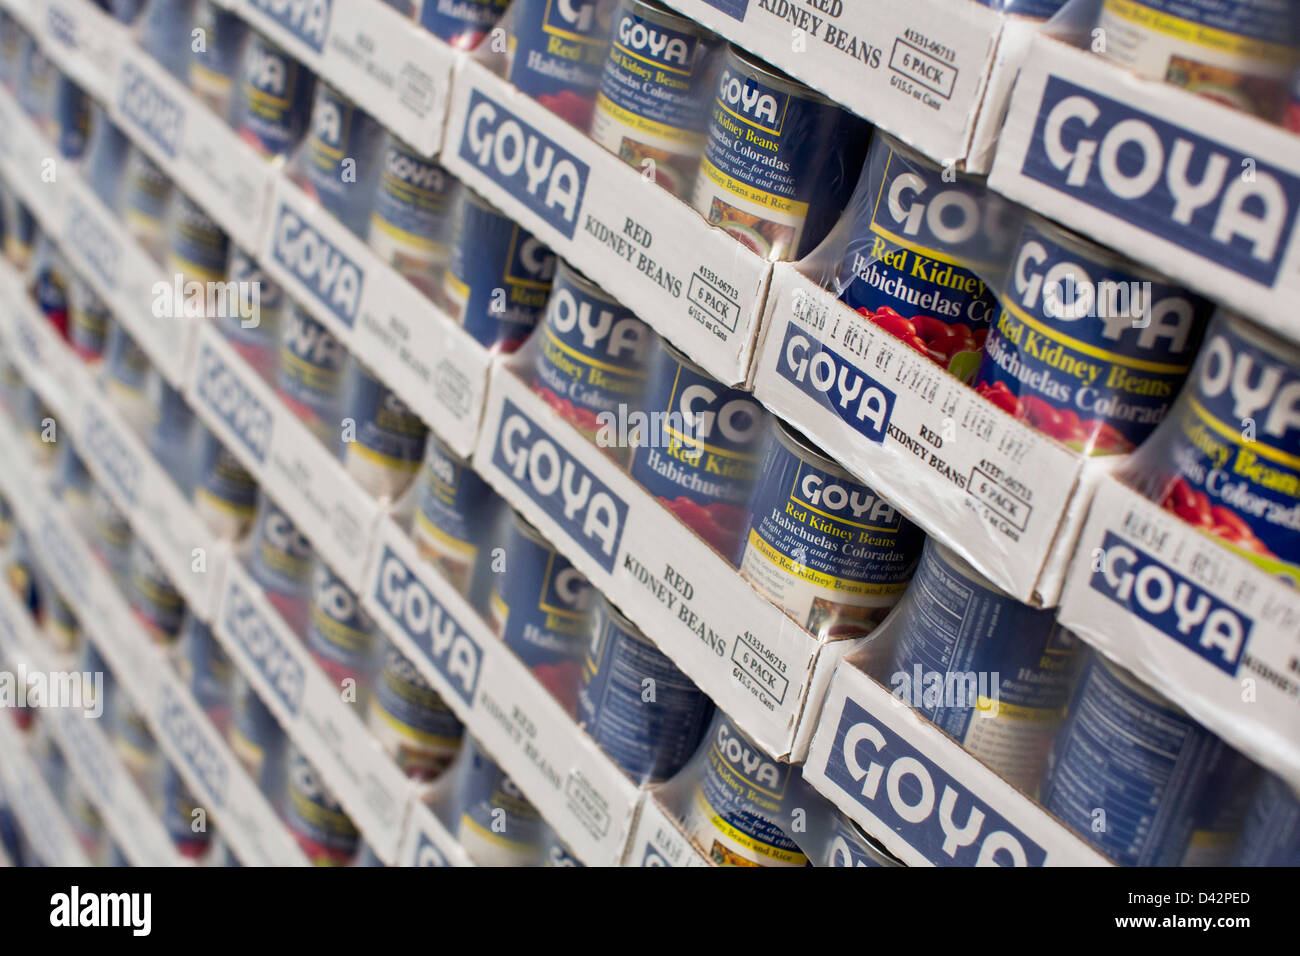 Goya kidney beans on display at a Costco Wholesale Warehouse Club. Stock Photo